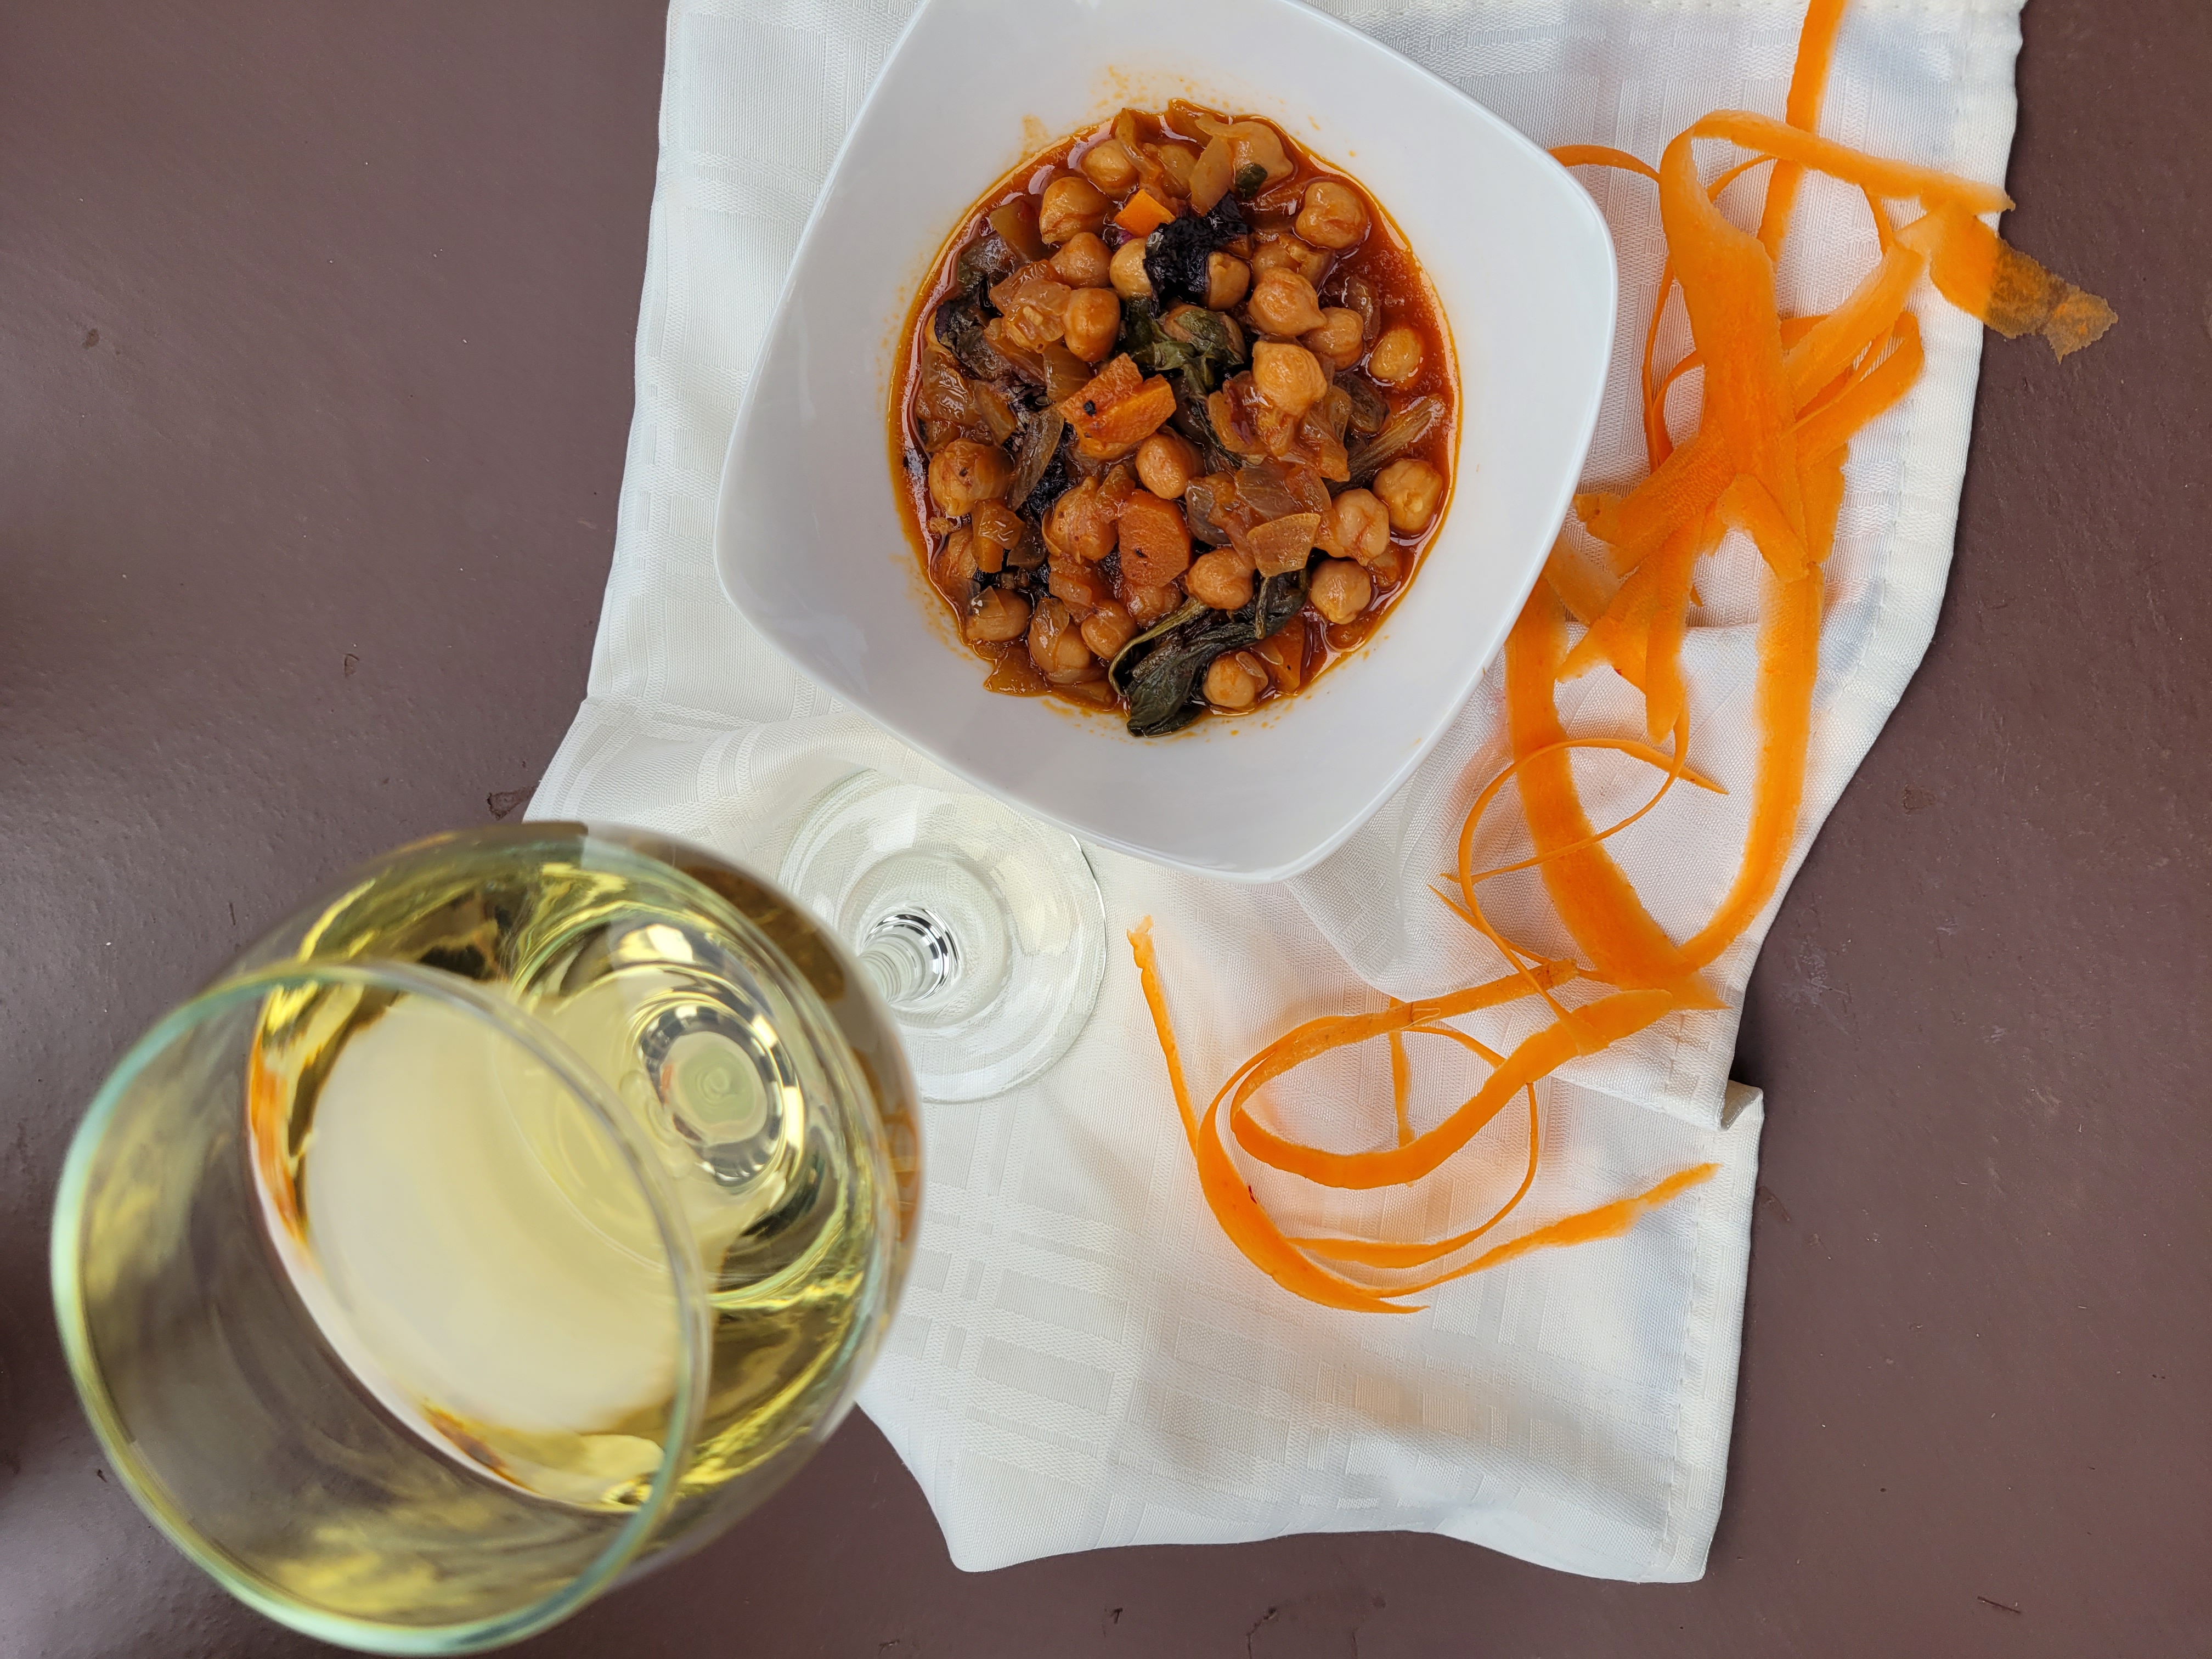 Chickpeas in a dish with a glass of wine